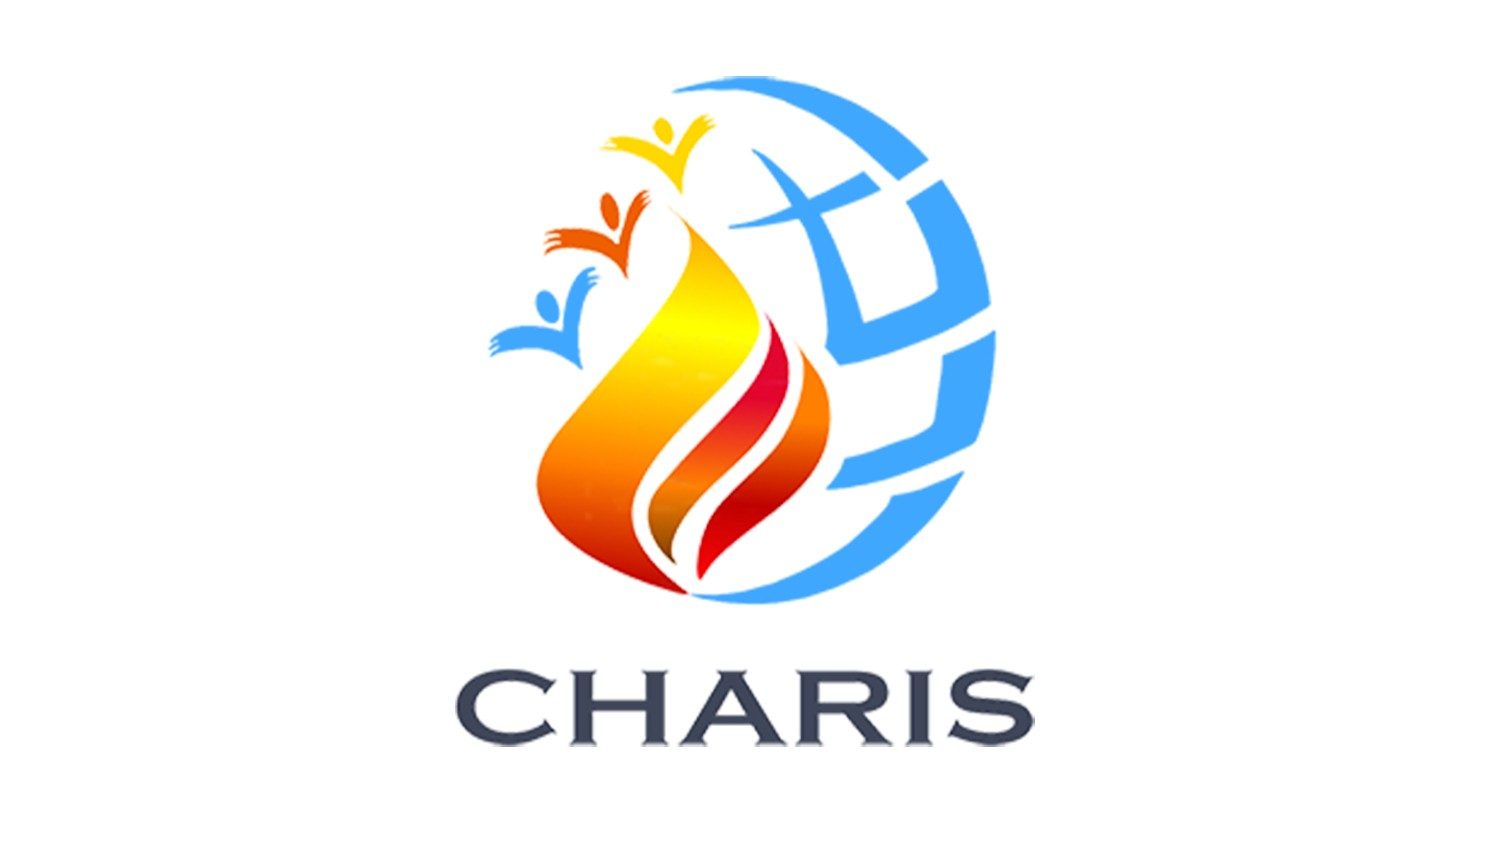 You are currently viewing CHARIS, a service created a year ago by Pope Francis.